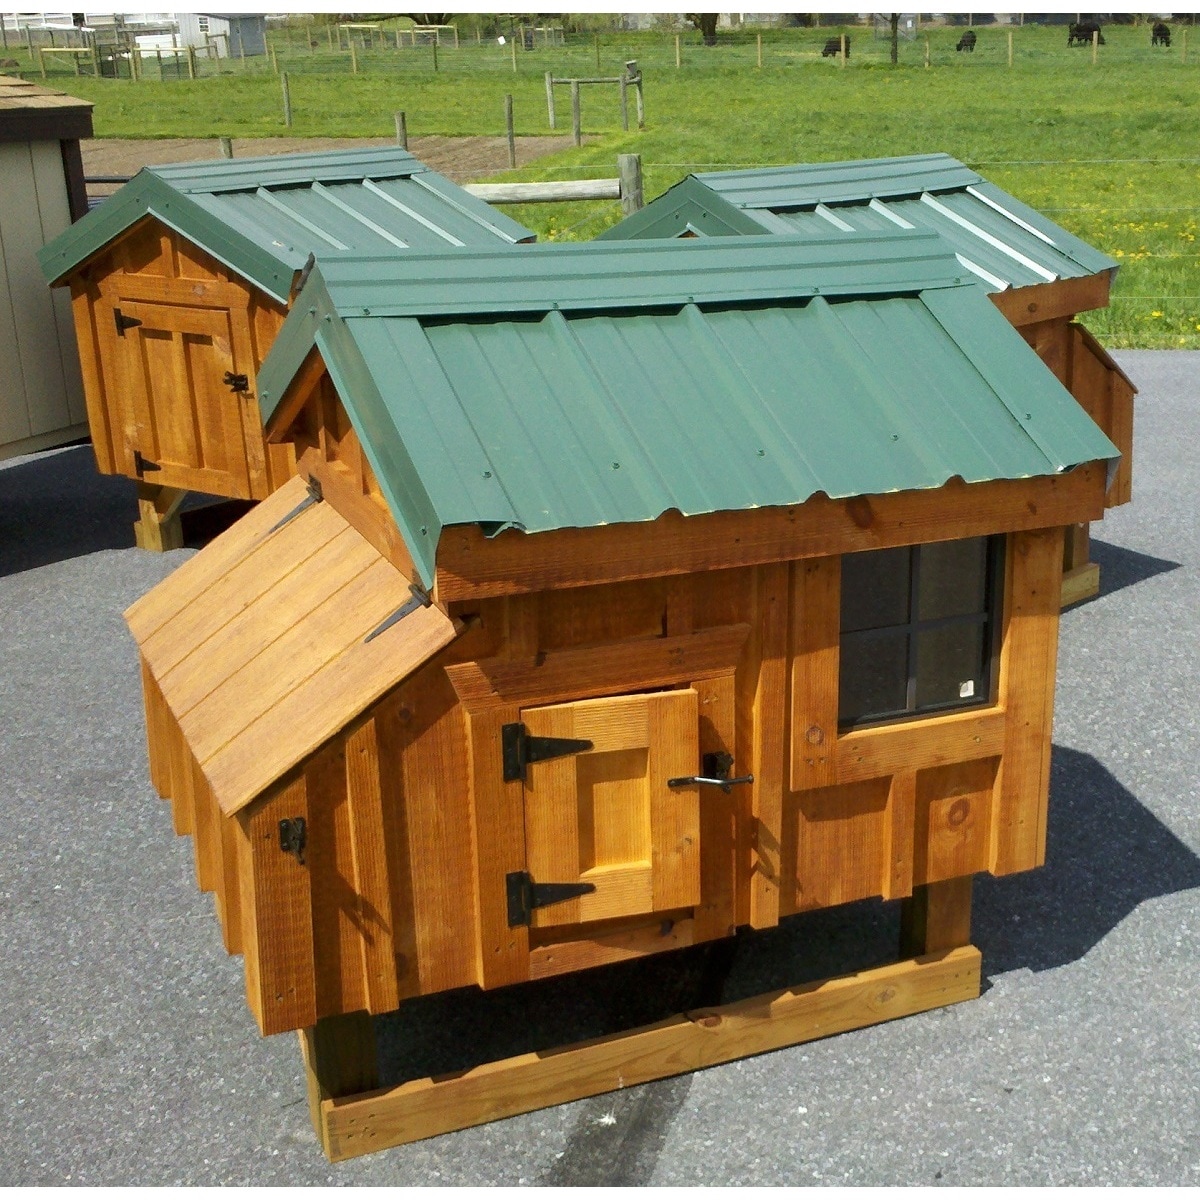 Shop Tucker's Coops A-frame Handcrafted Pre-assembled Solid Wood ... - Tuckers Coops A Frame HanD CrafteD Pre AssembleD SoliD WooD Chicken Coop 8f2a334b 622f 4fc1 Aec9 C64c88247f86